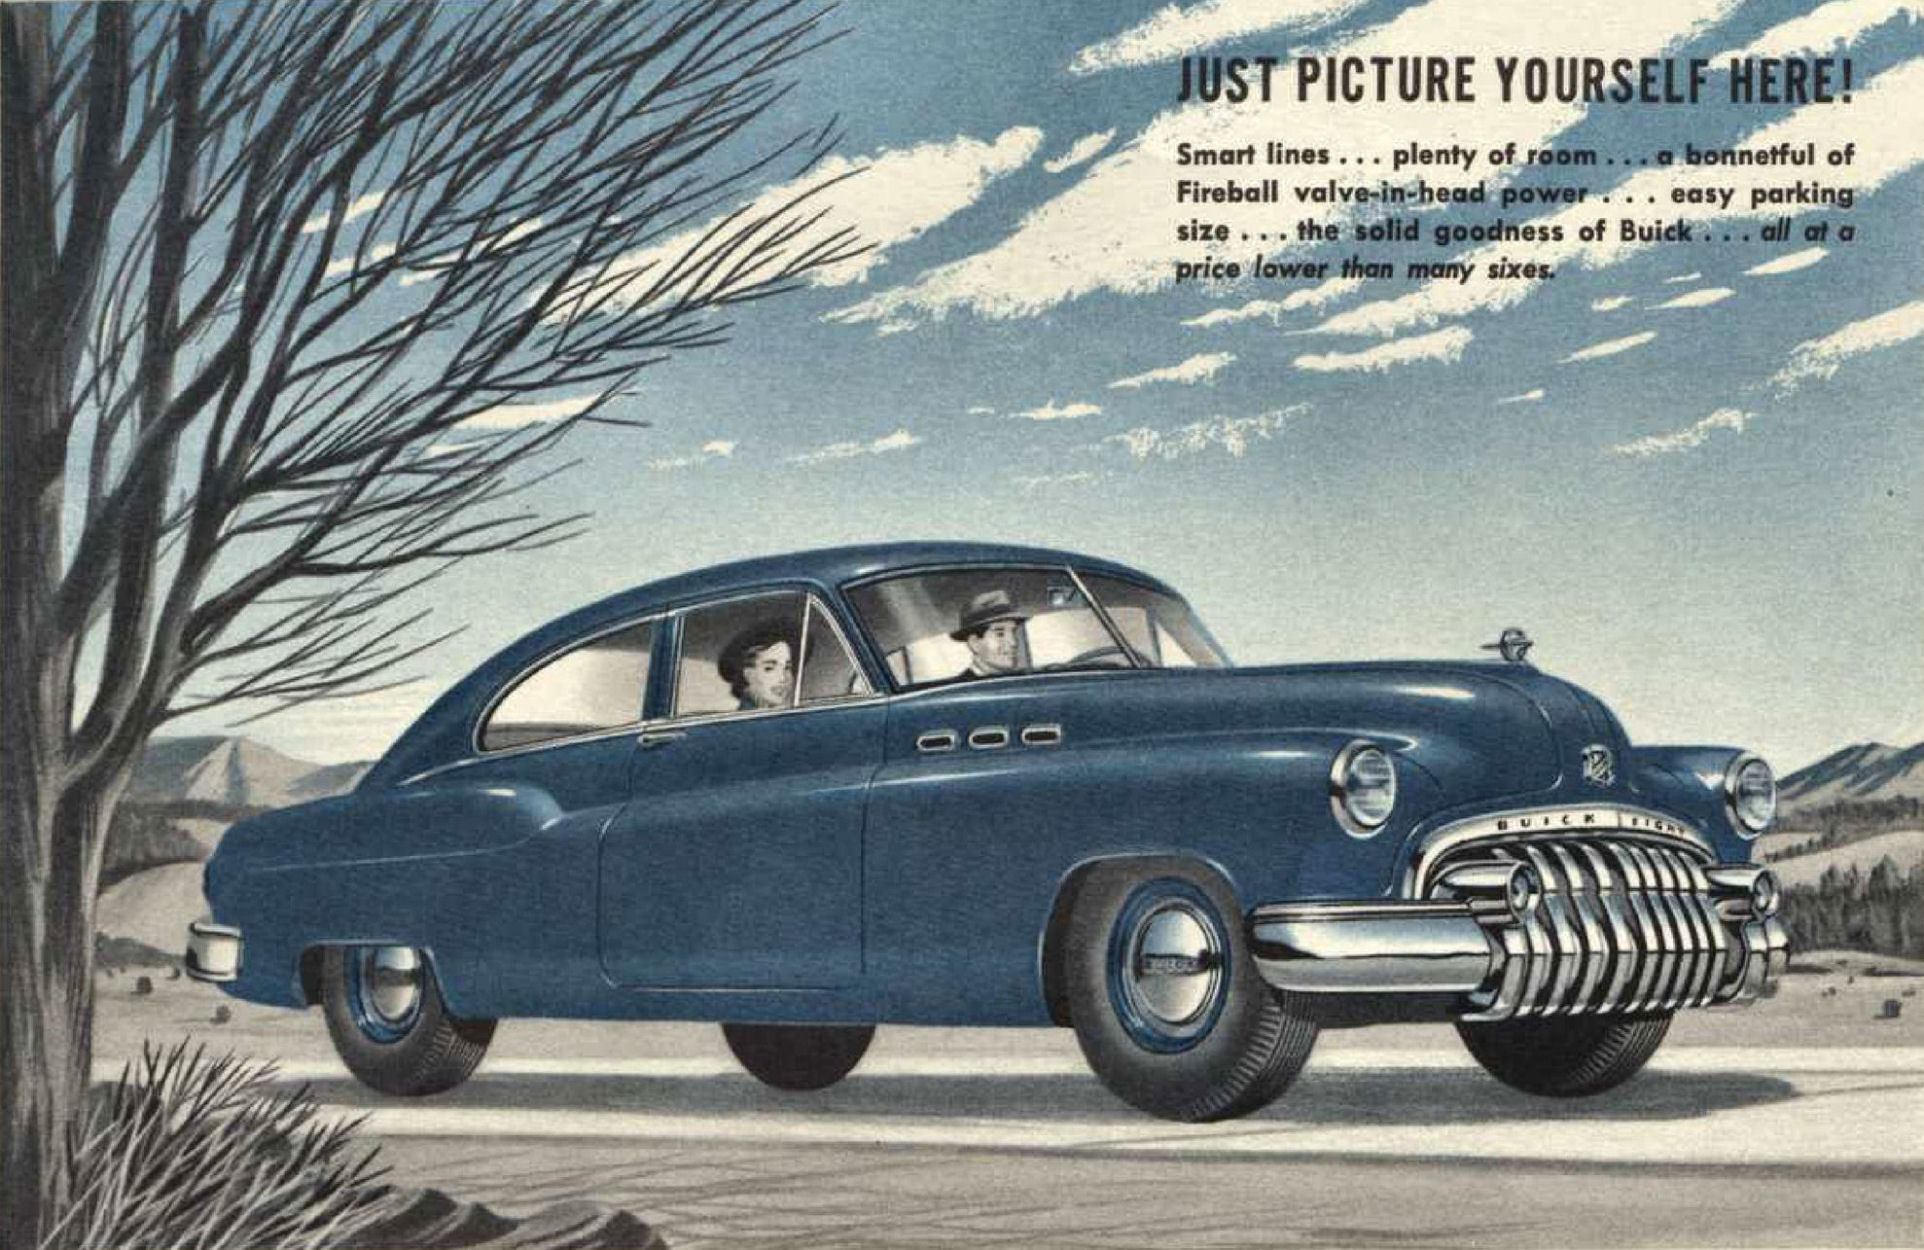 1950 Buick Post Card.pdf-2023-11-20 11.31.20_Page_1